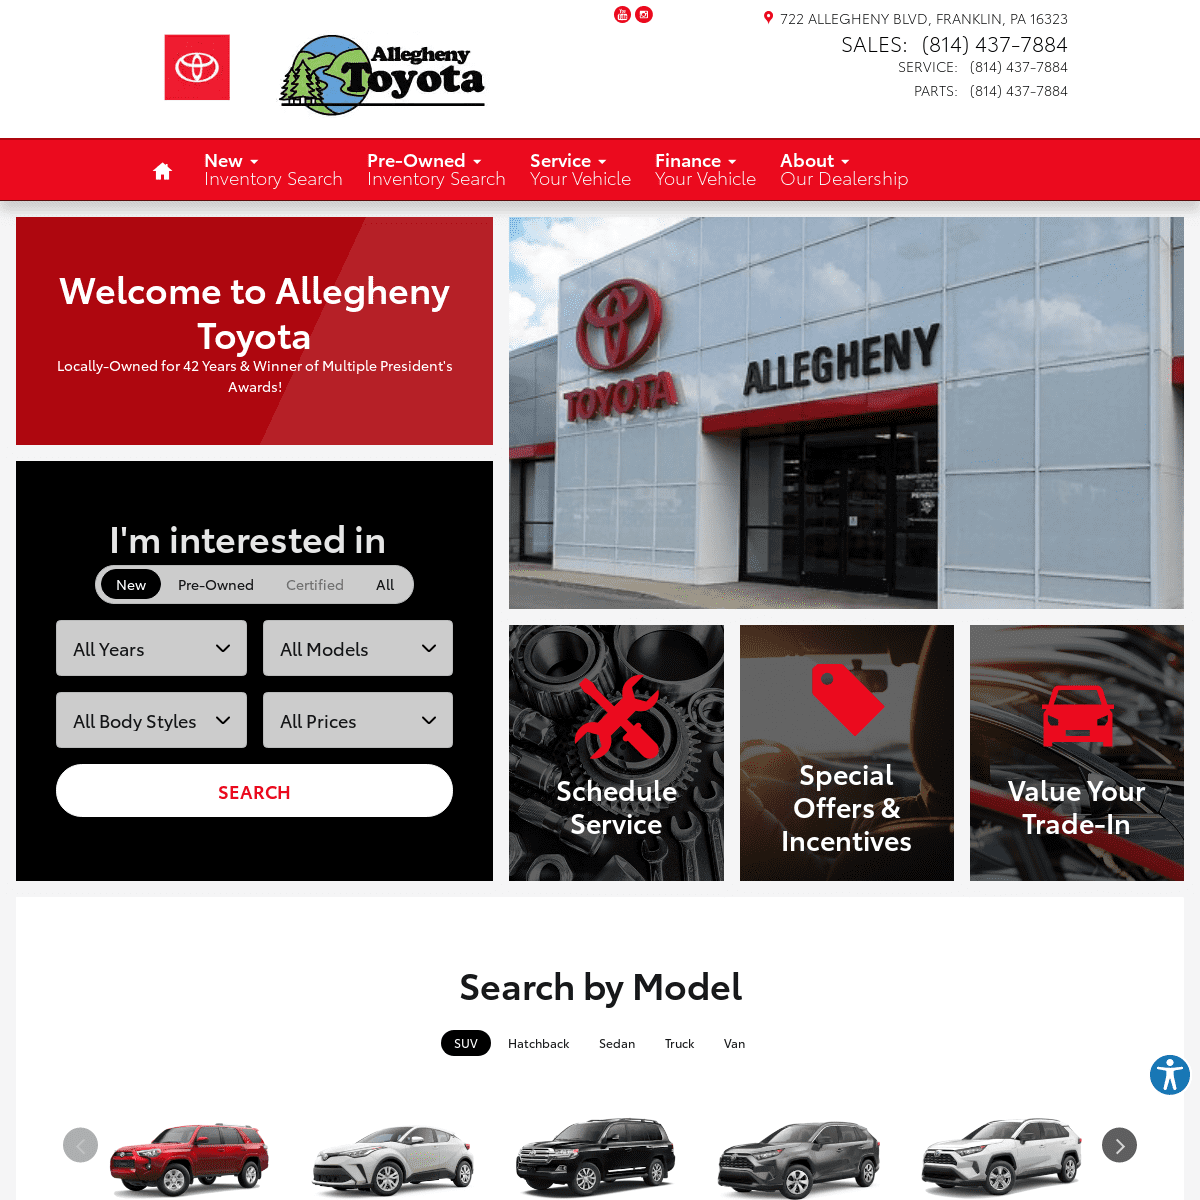 A complete backup of alleghenytoyotapa.com